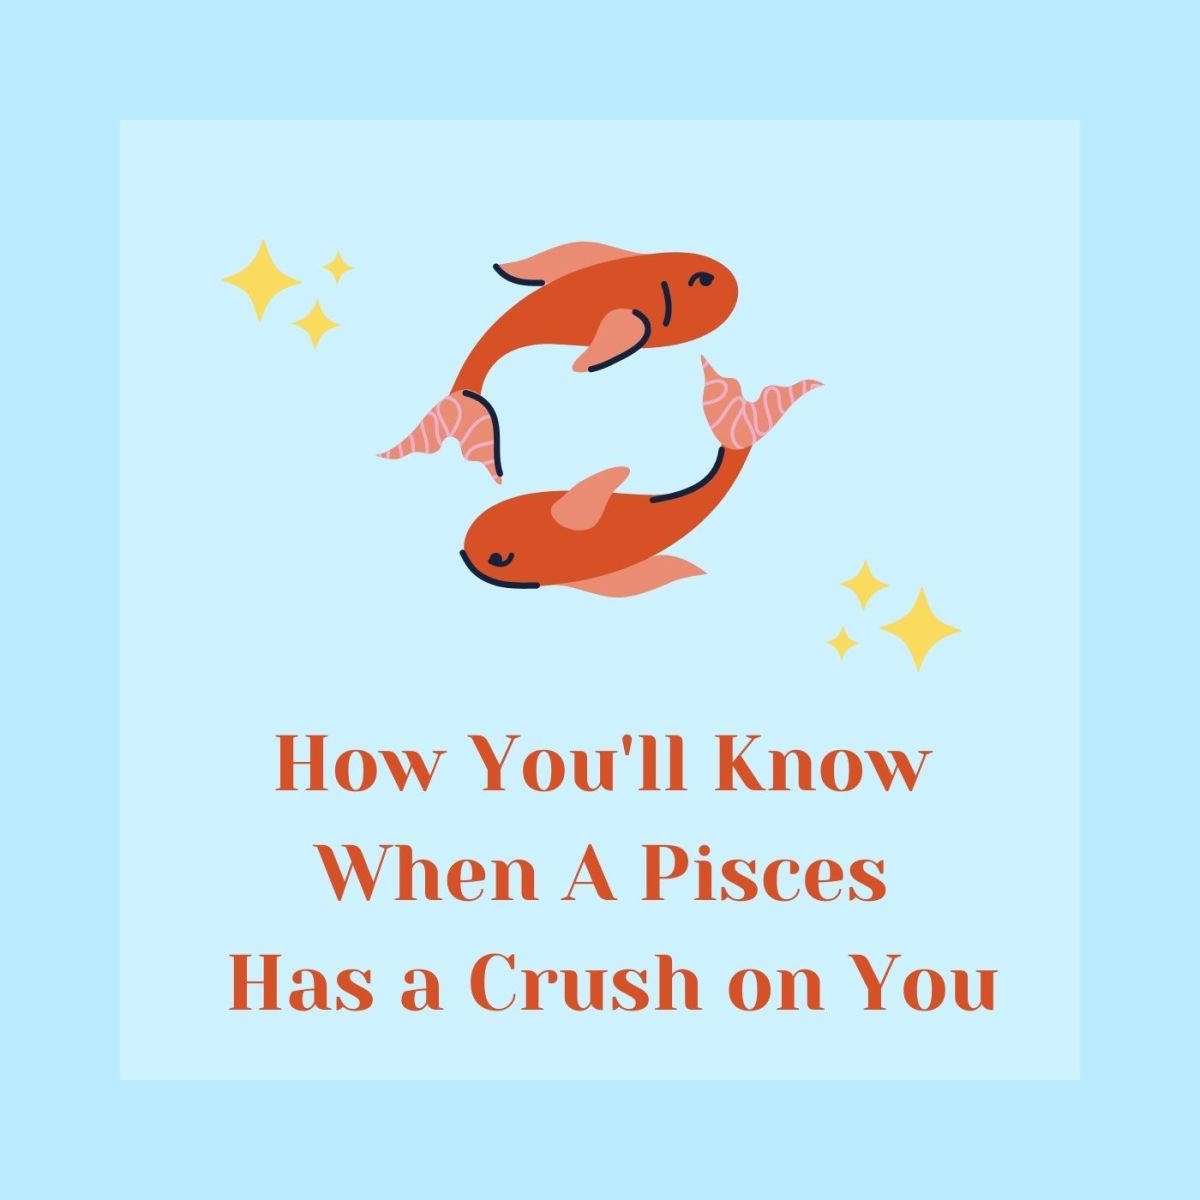 Trust me, you'll know when a Pisces likes you!